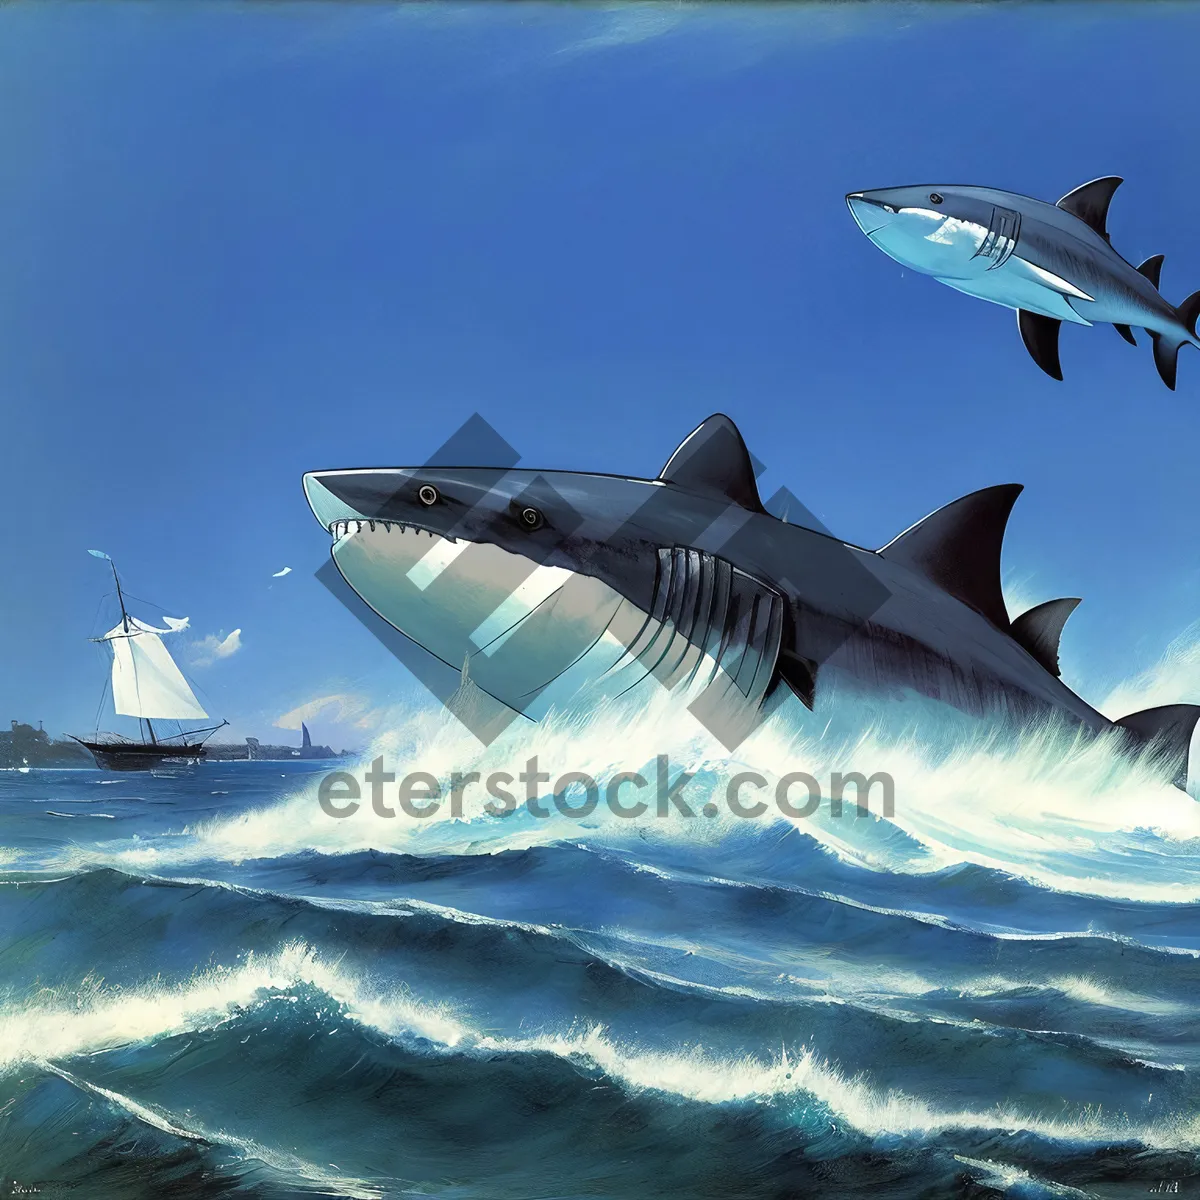 Picture of Tropical Marine Wildlife: Majestic Shark in Seawater